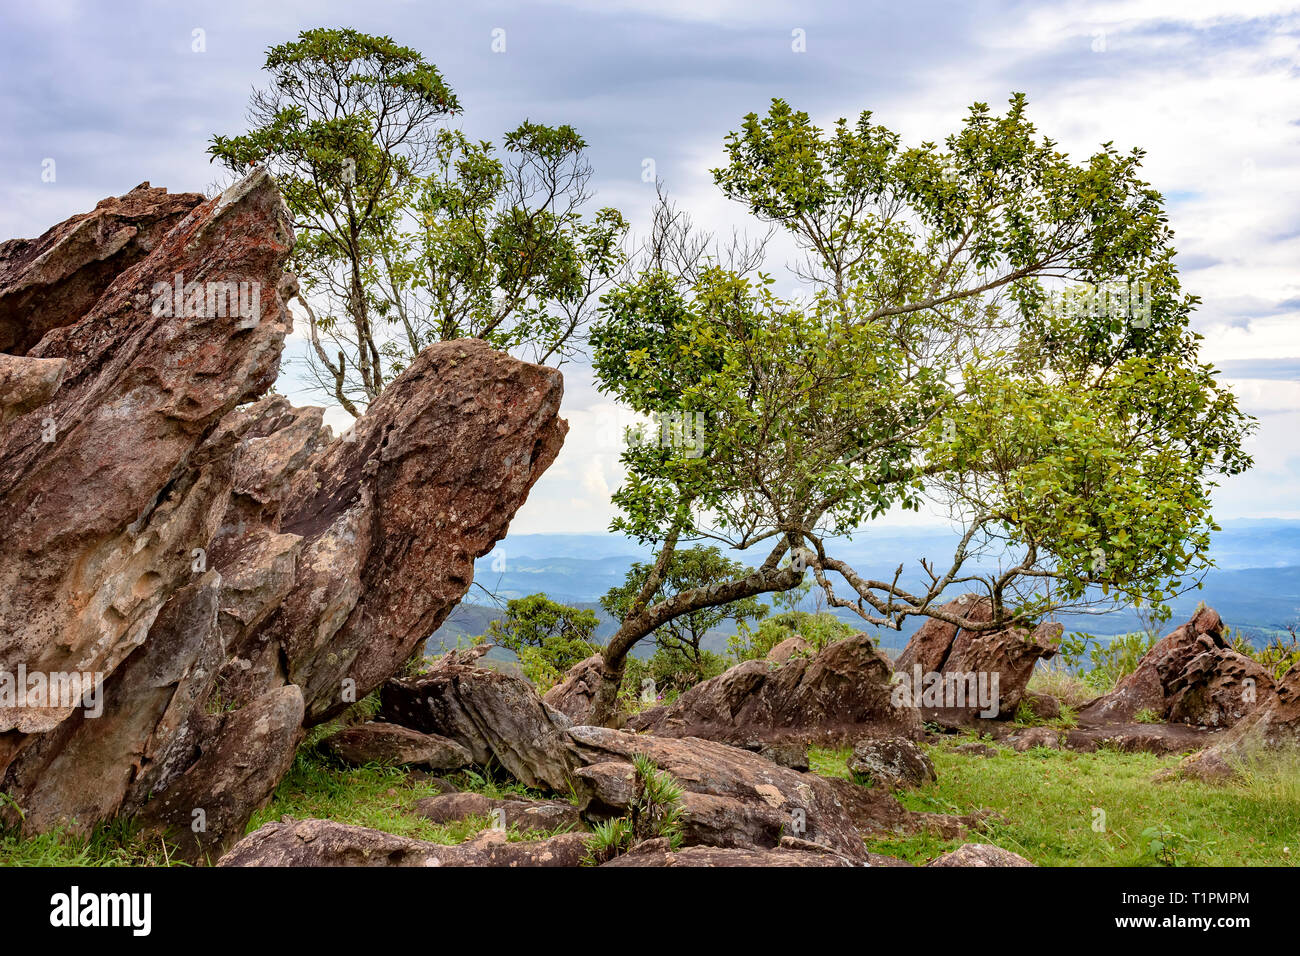 Rock formations and vegetation between the mountains and valleys of Nova Lima in the state of Minas Gerais, Brazil Stock Photo